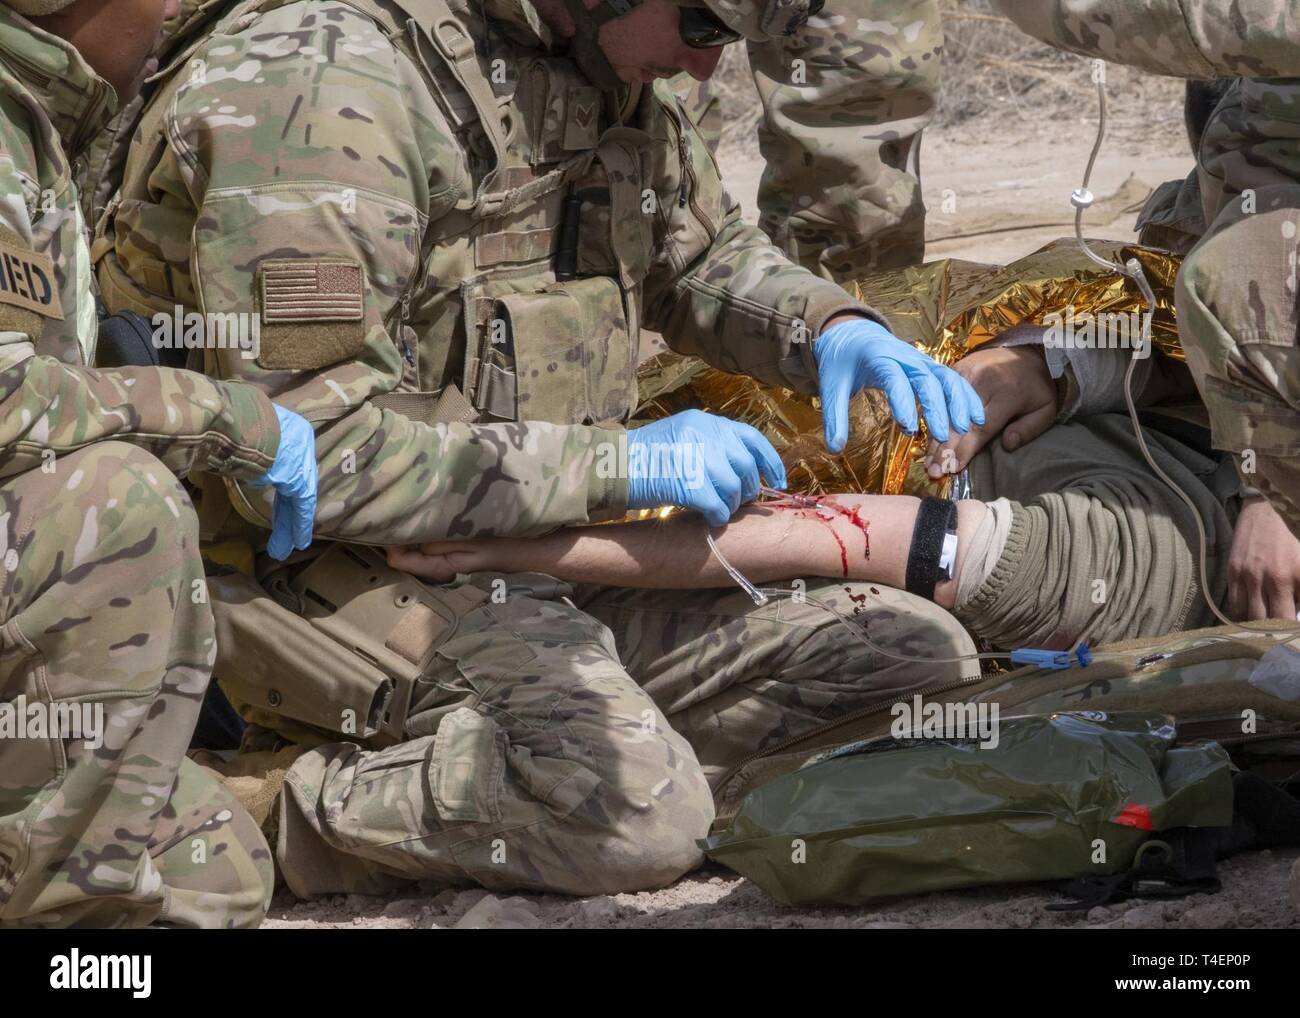 Airmen from the 823d Base Defense Squadron practice tactical combat casualty care as part of the Mission Readiness Exercise (MRX) scenario at Camp Guernsey, Wyo., March 26, 2019. Under the supervision of a medic, the Airmen inserted an IV into the simulated victim’s arm. The MRX scenario put small, isolated teams of defenders in multiple stressful scenarios to practice decision making in an adaptive basing situation. Stock Photo